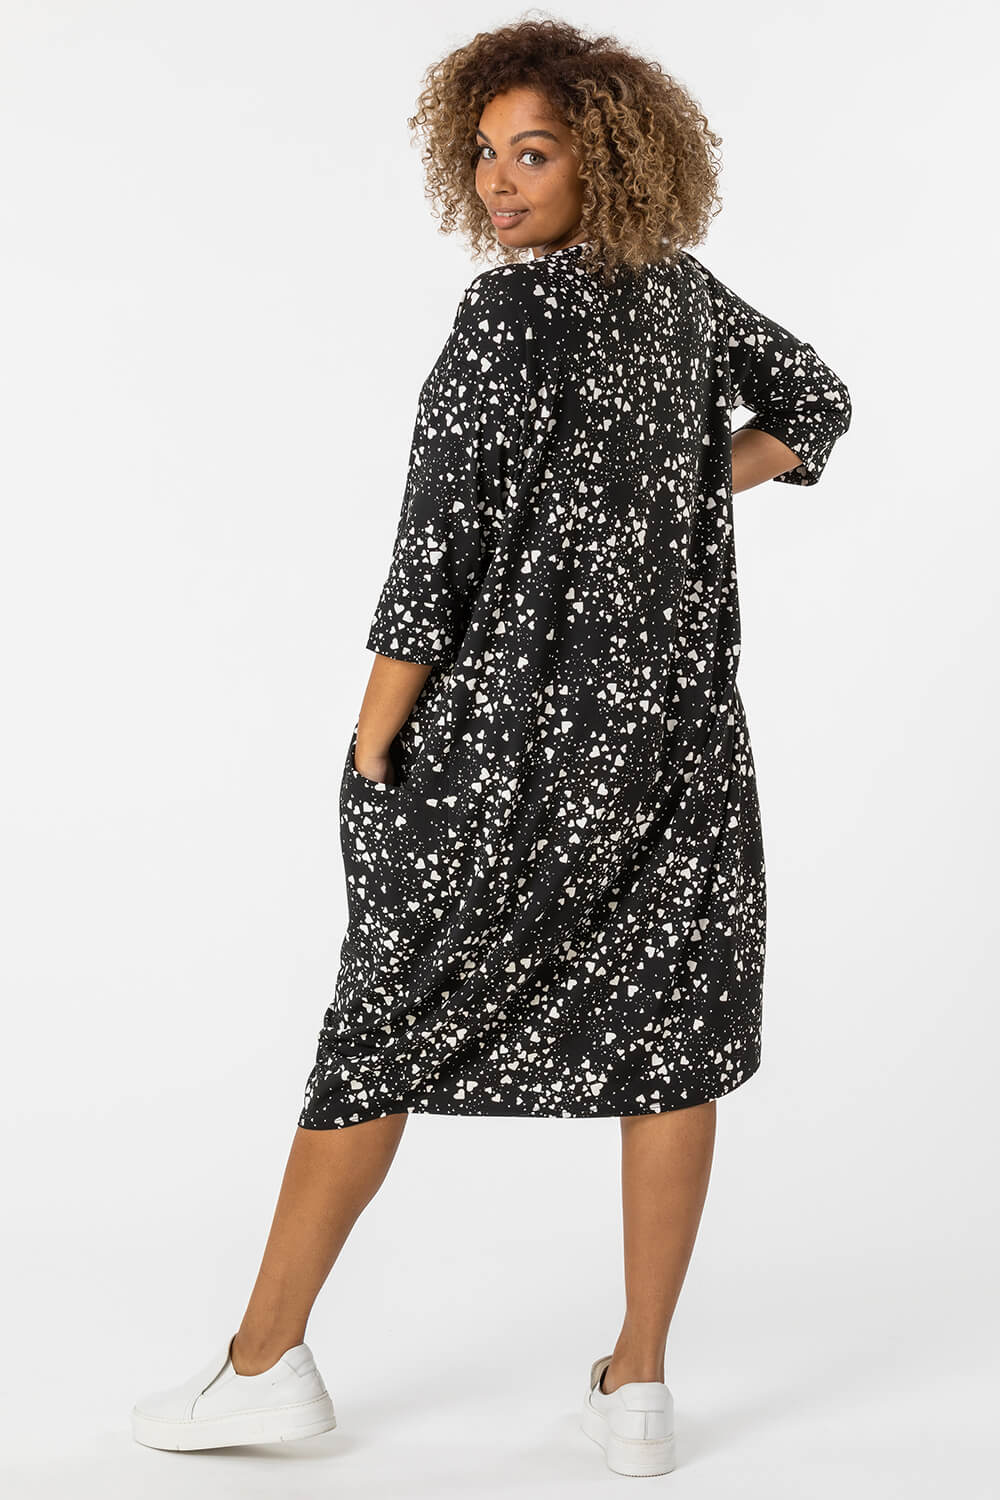 Black Curve Ditsy Heart Print Cocoon Dress, Image 2 of 4